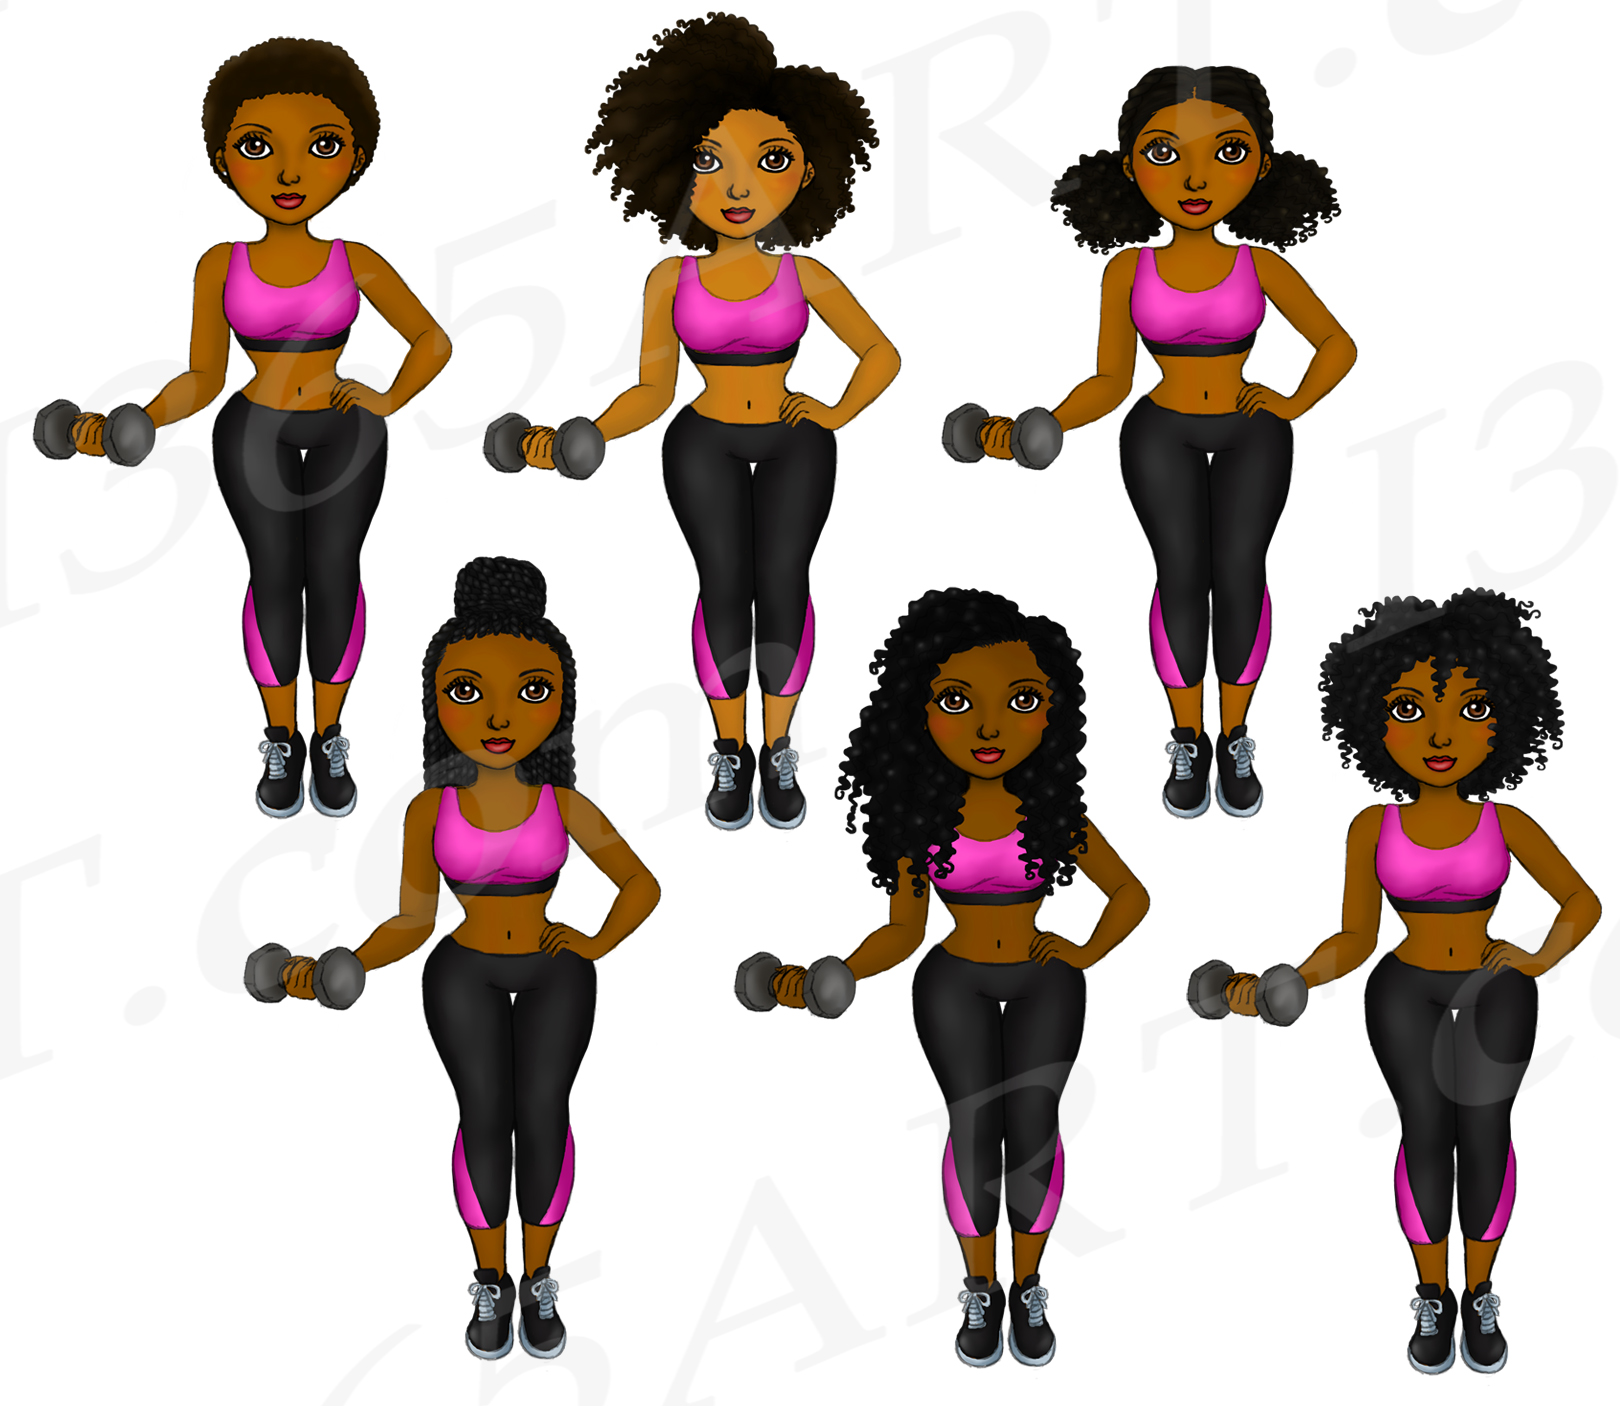 Natural Hair Black Fitness Girls Clipart Workout Fashion.